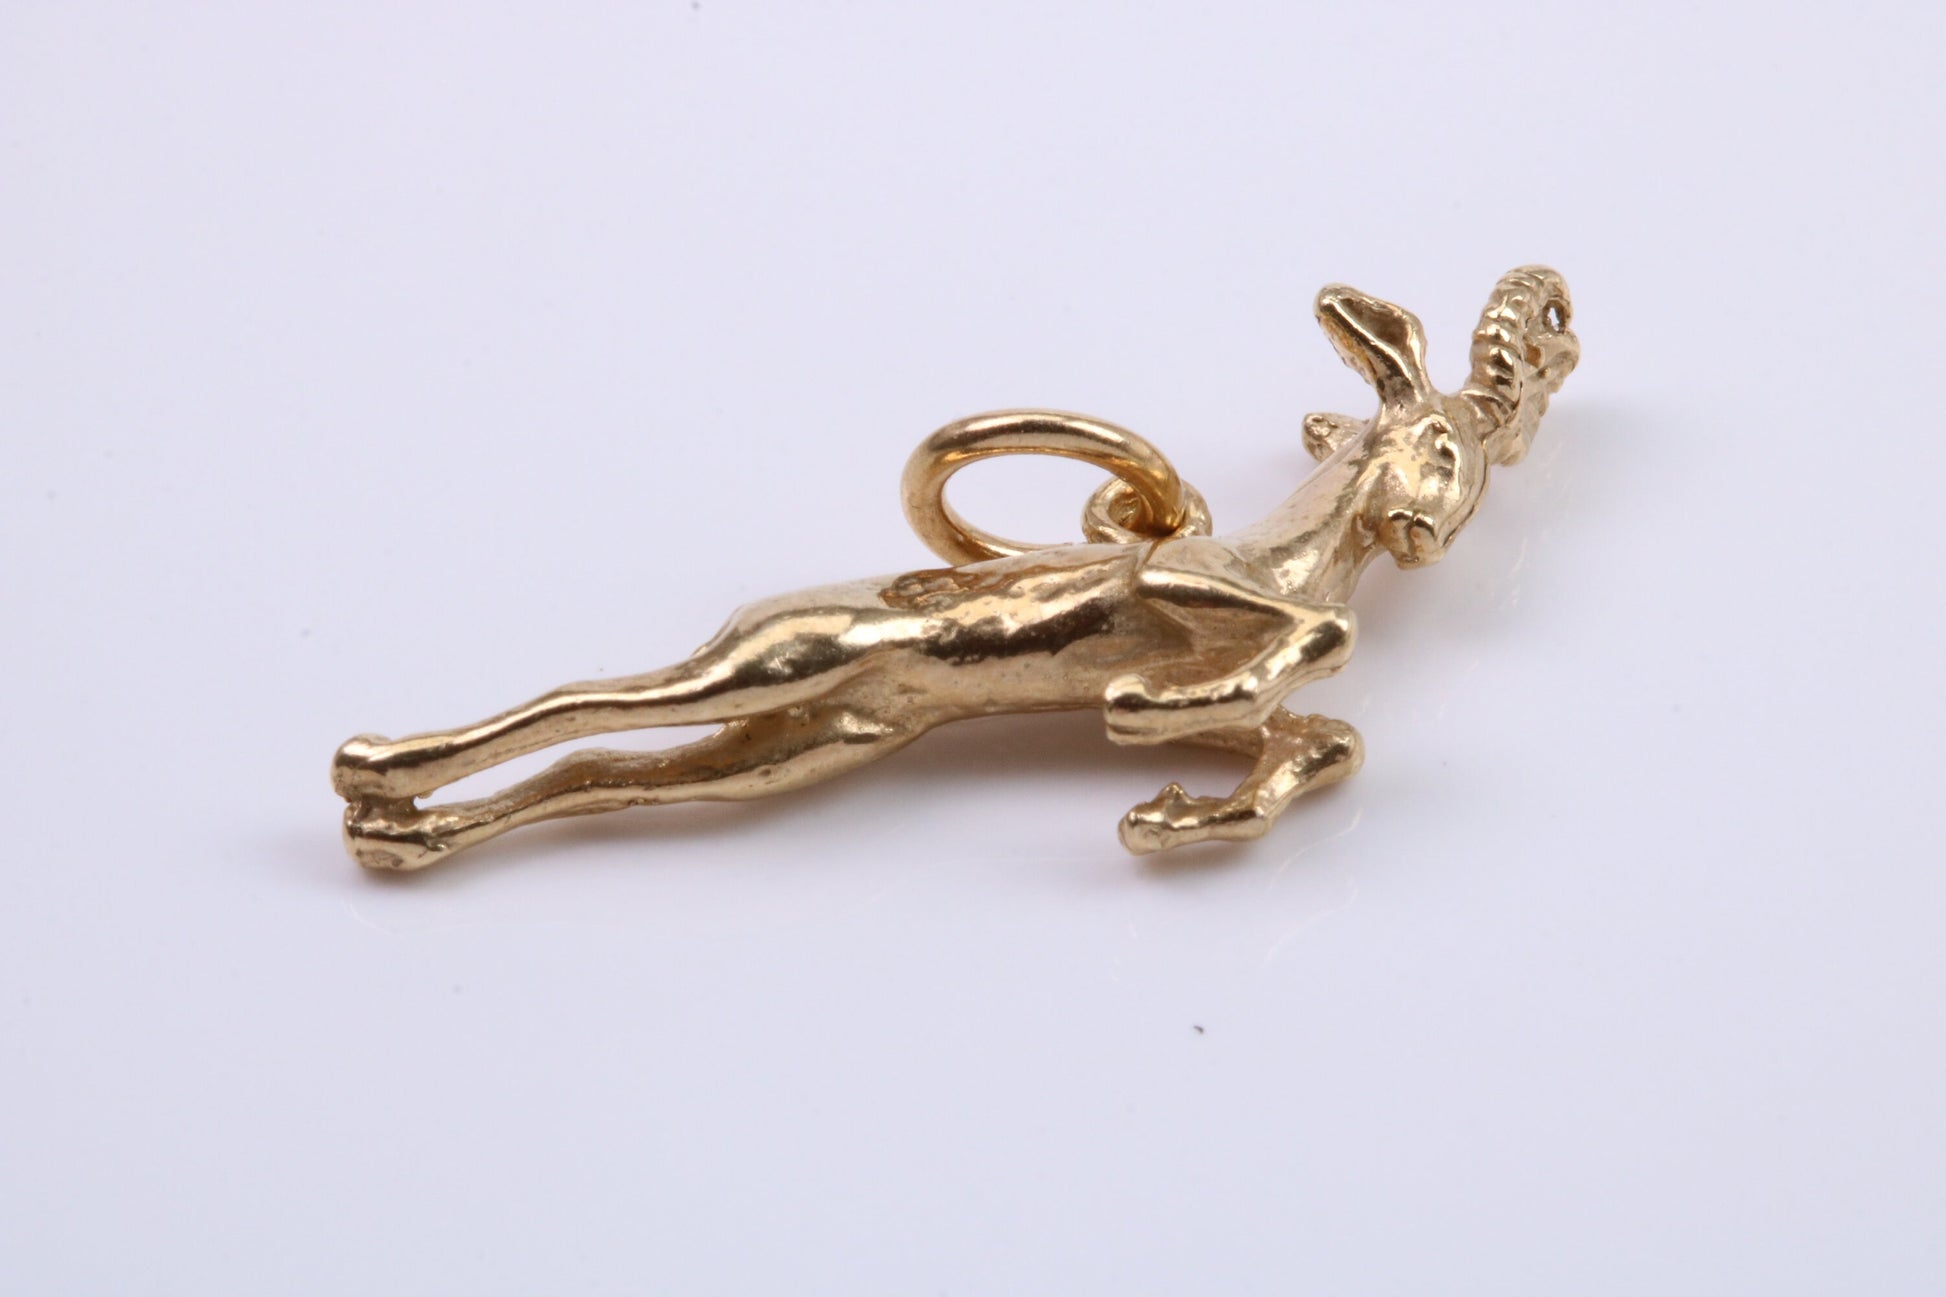 Jumping Gazelle Charm, Traditional Charm, Made from Solid 9ct Yellow Gold, British Hallmarked, Complete with Attachment Link